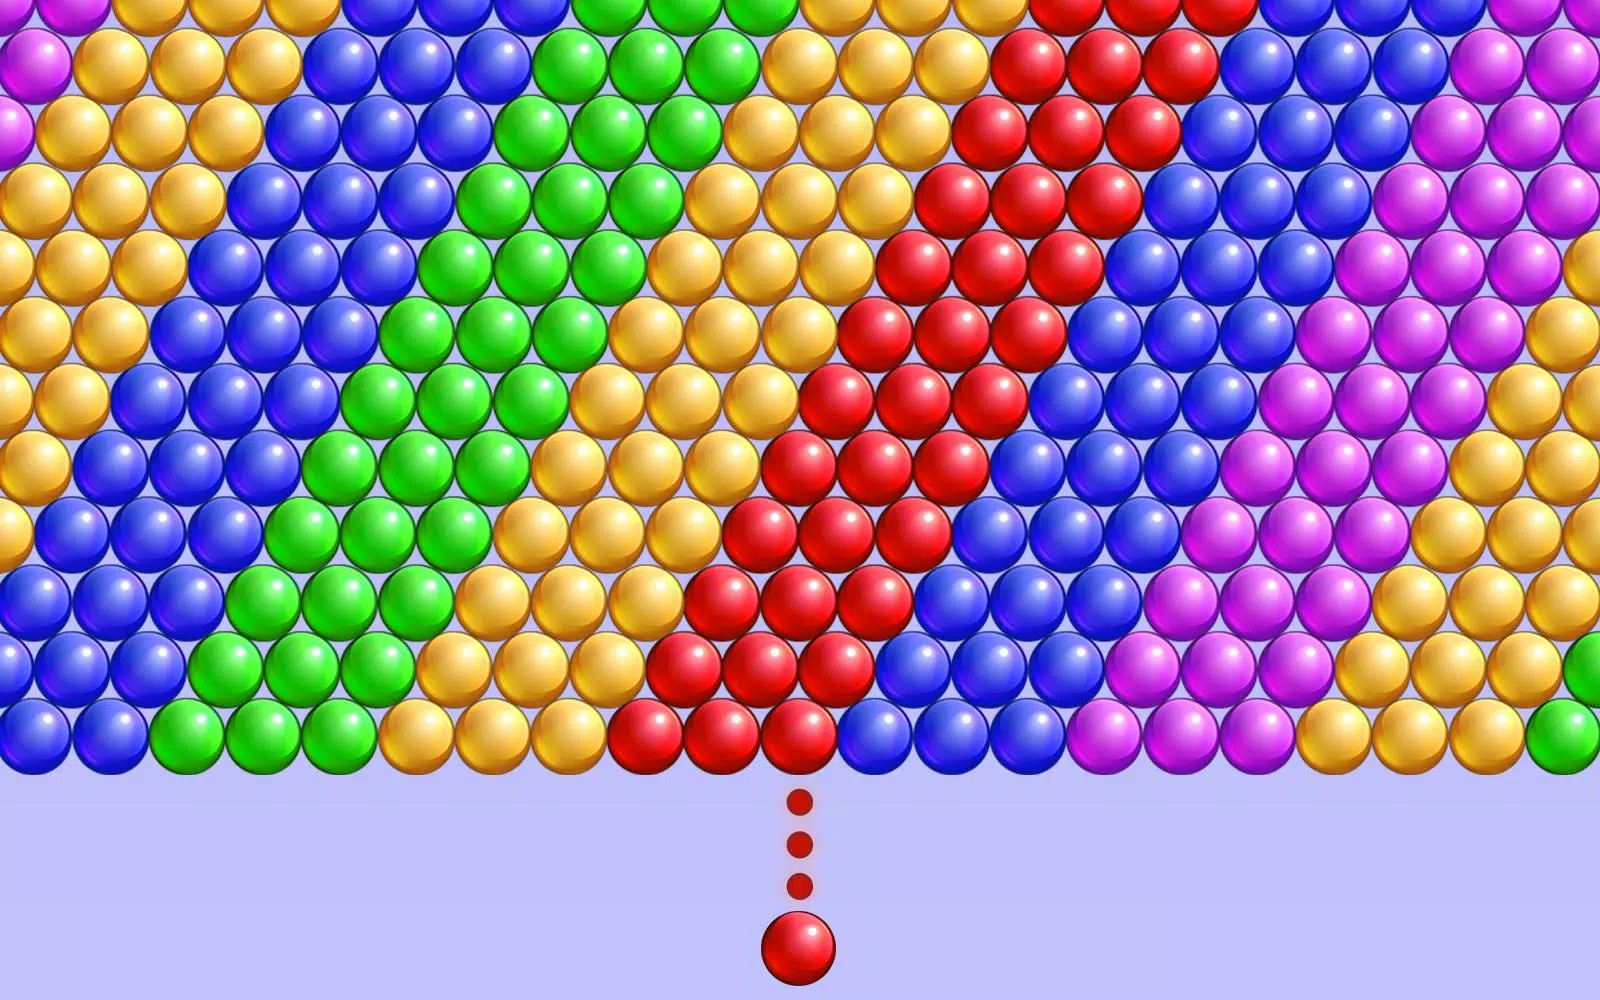 Bubble Shooter - Play Online on